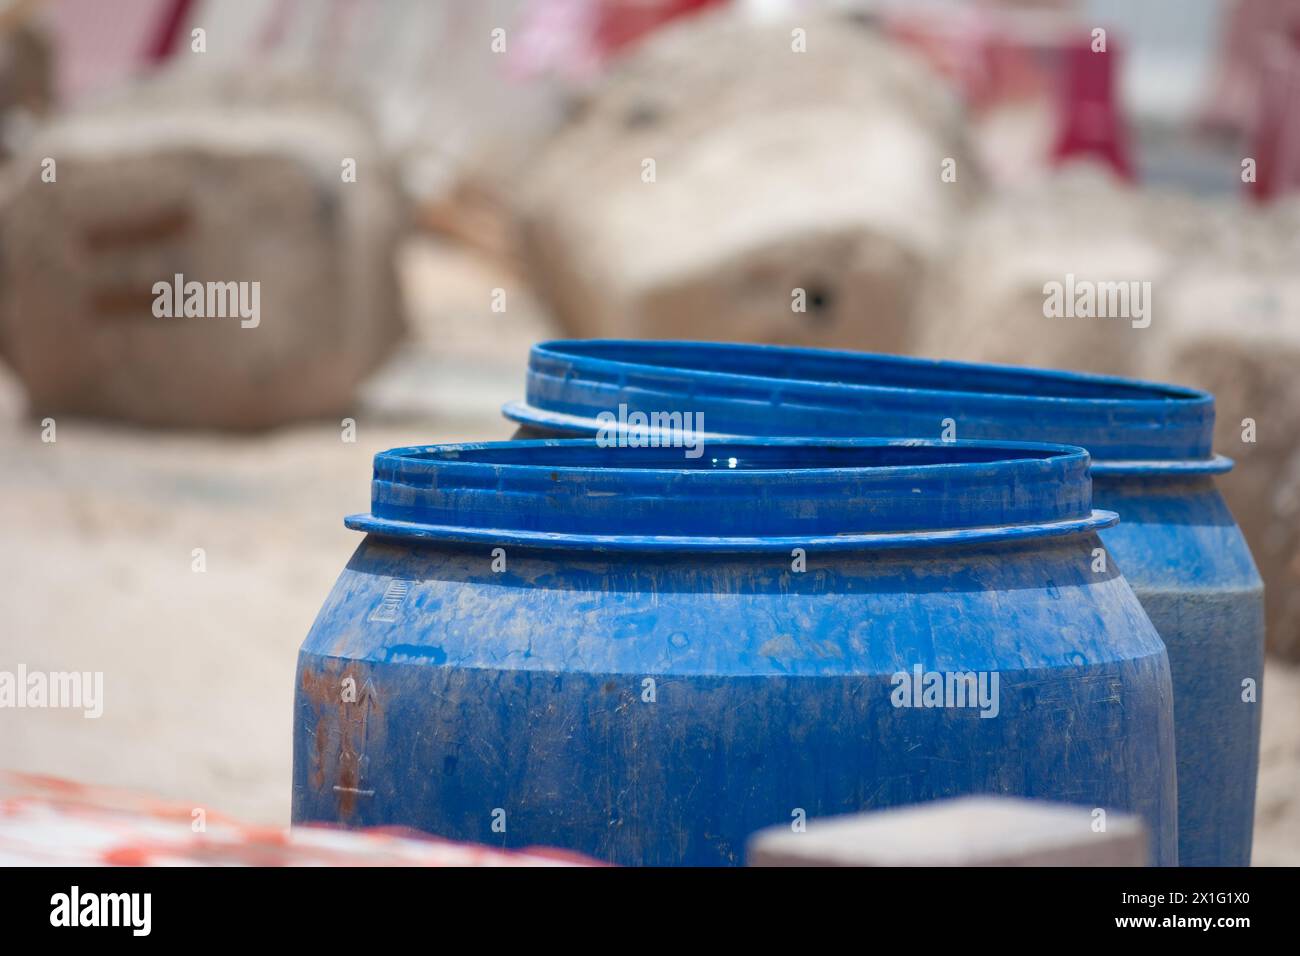 Blue buckets in an industrial setting Stock Photo